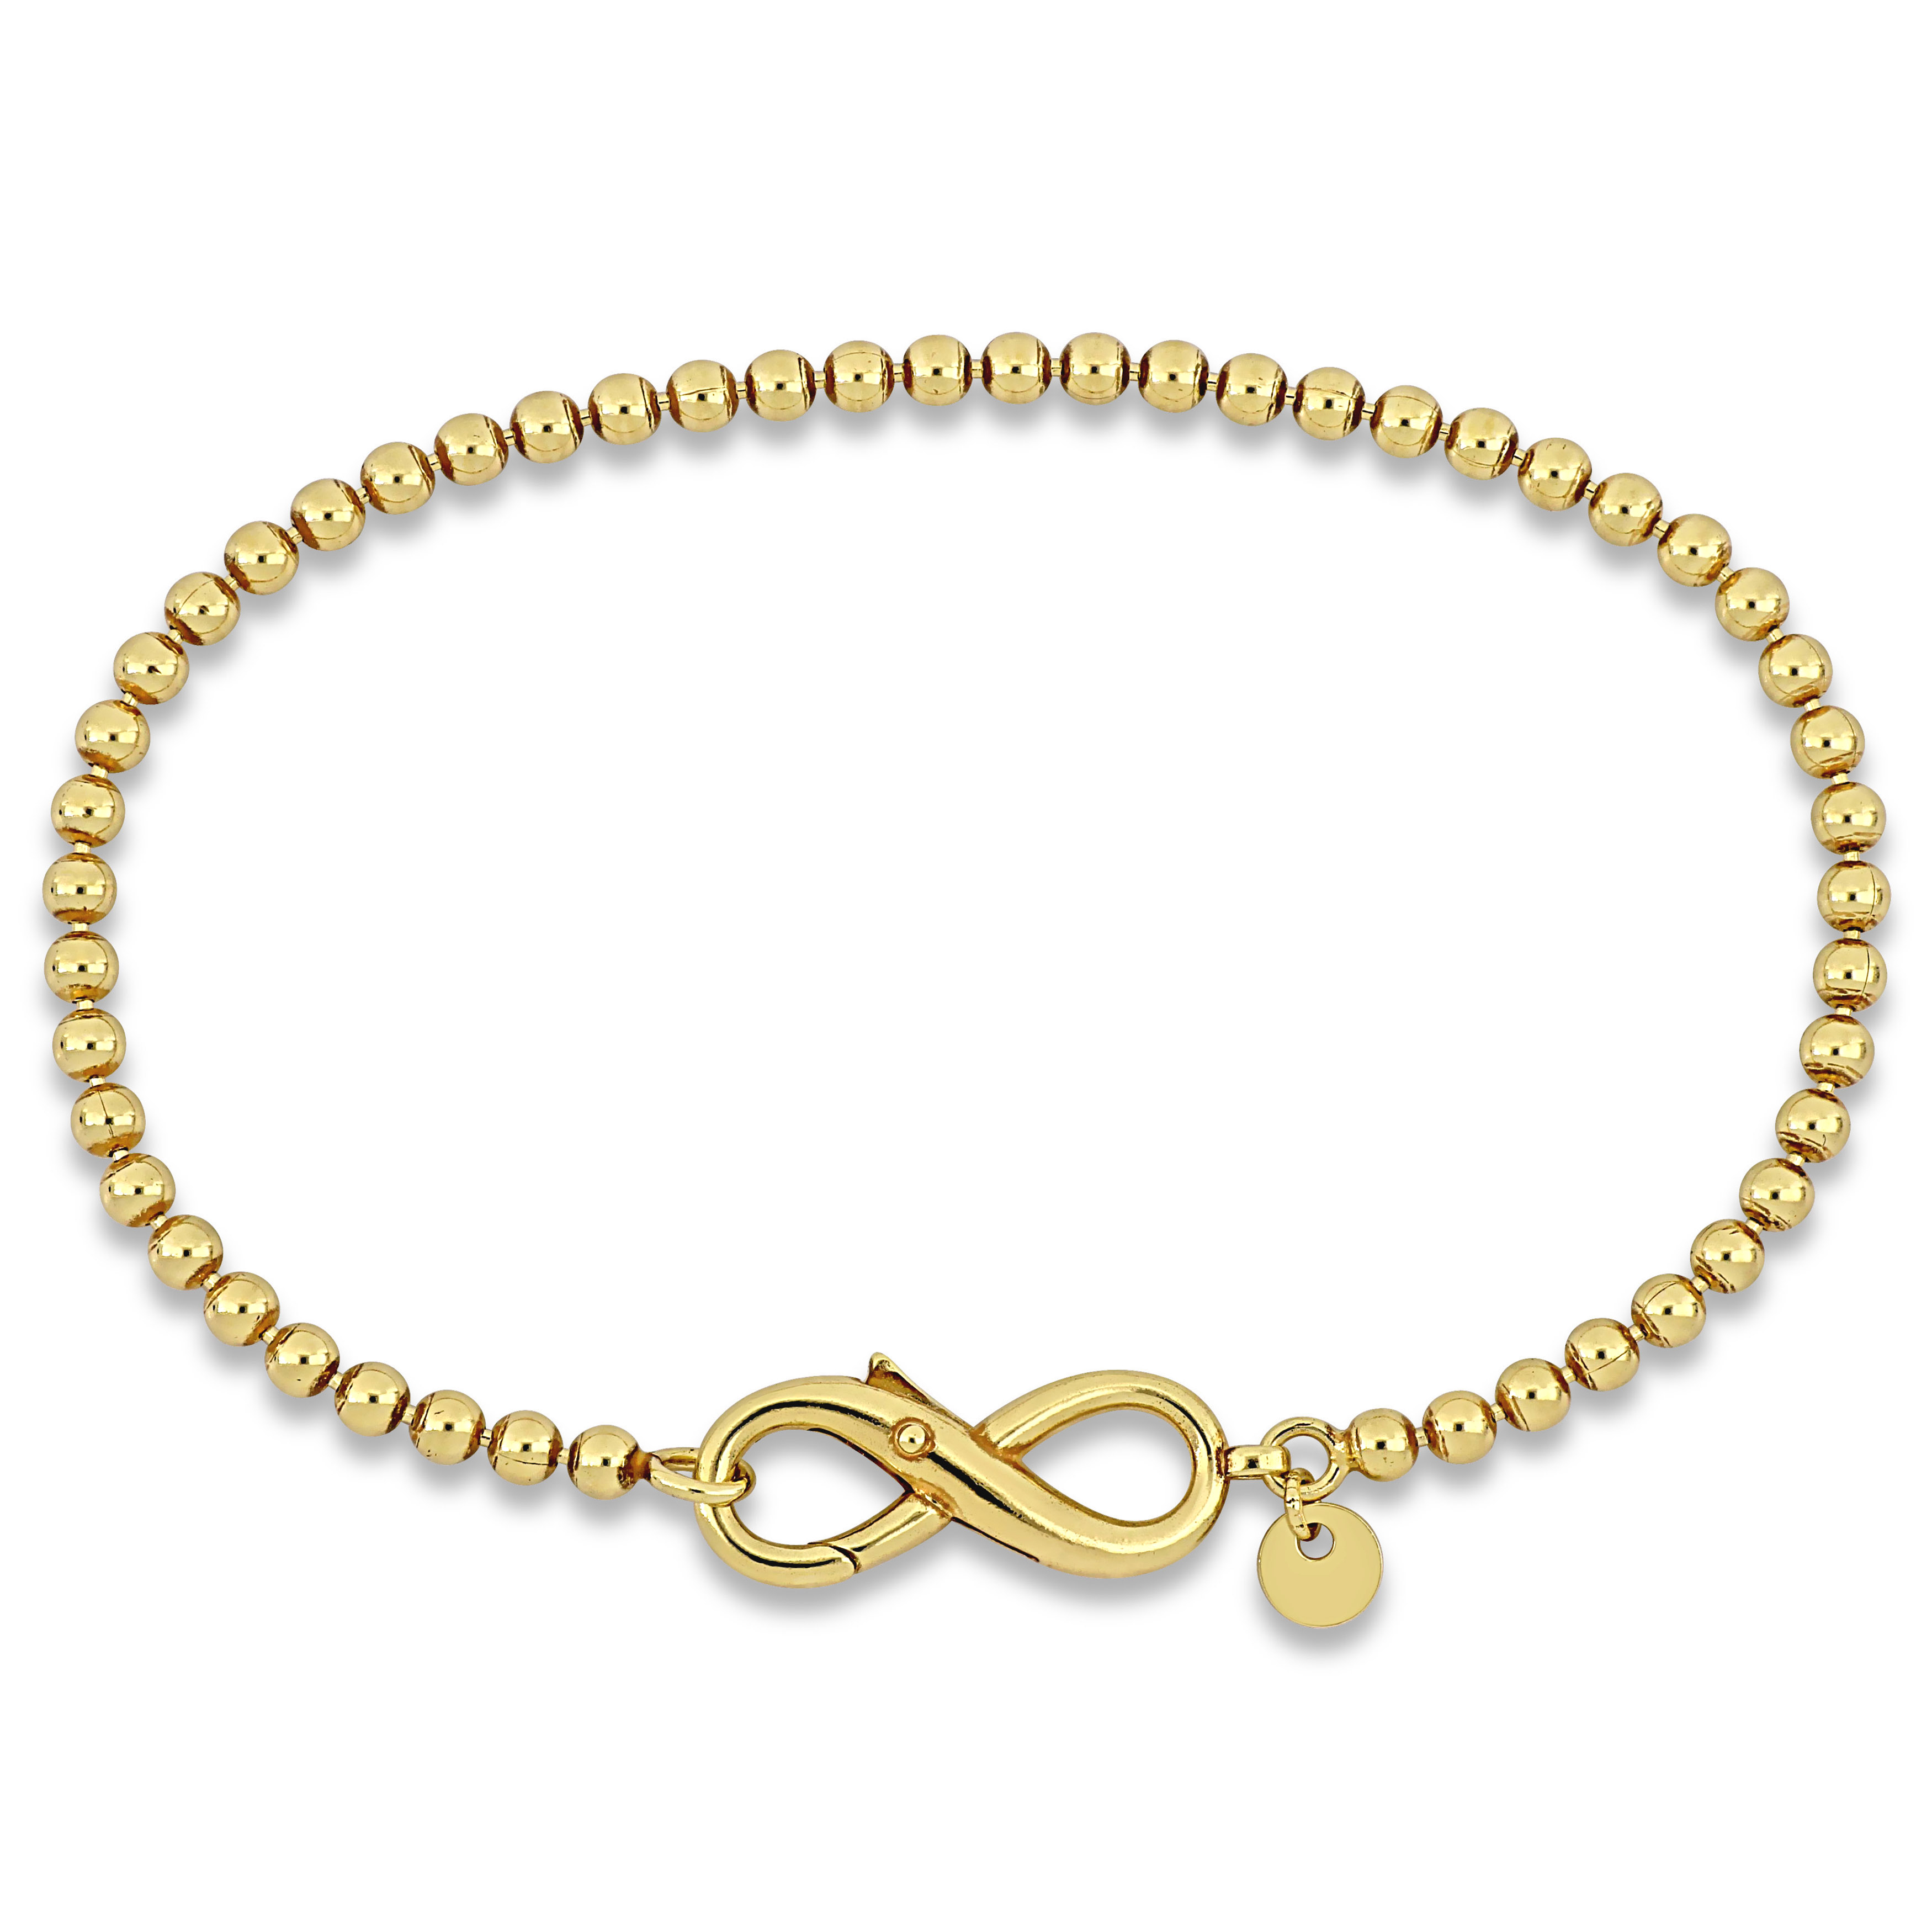 Ball Link Bracelet with Infinity Clasp in Yellow Plated Sterling Silver - 7.5 in.